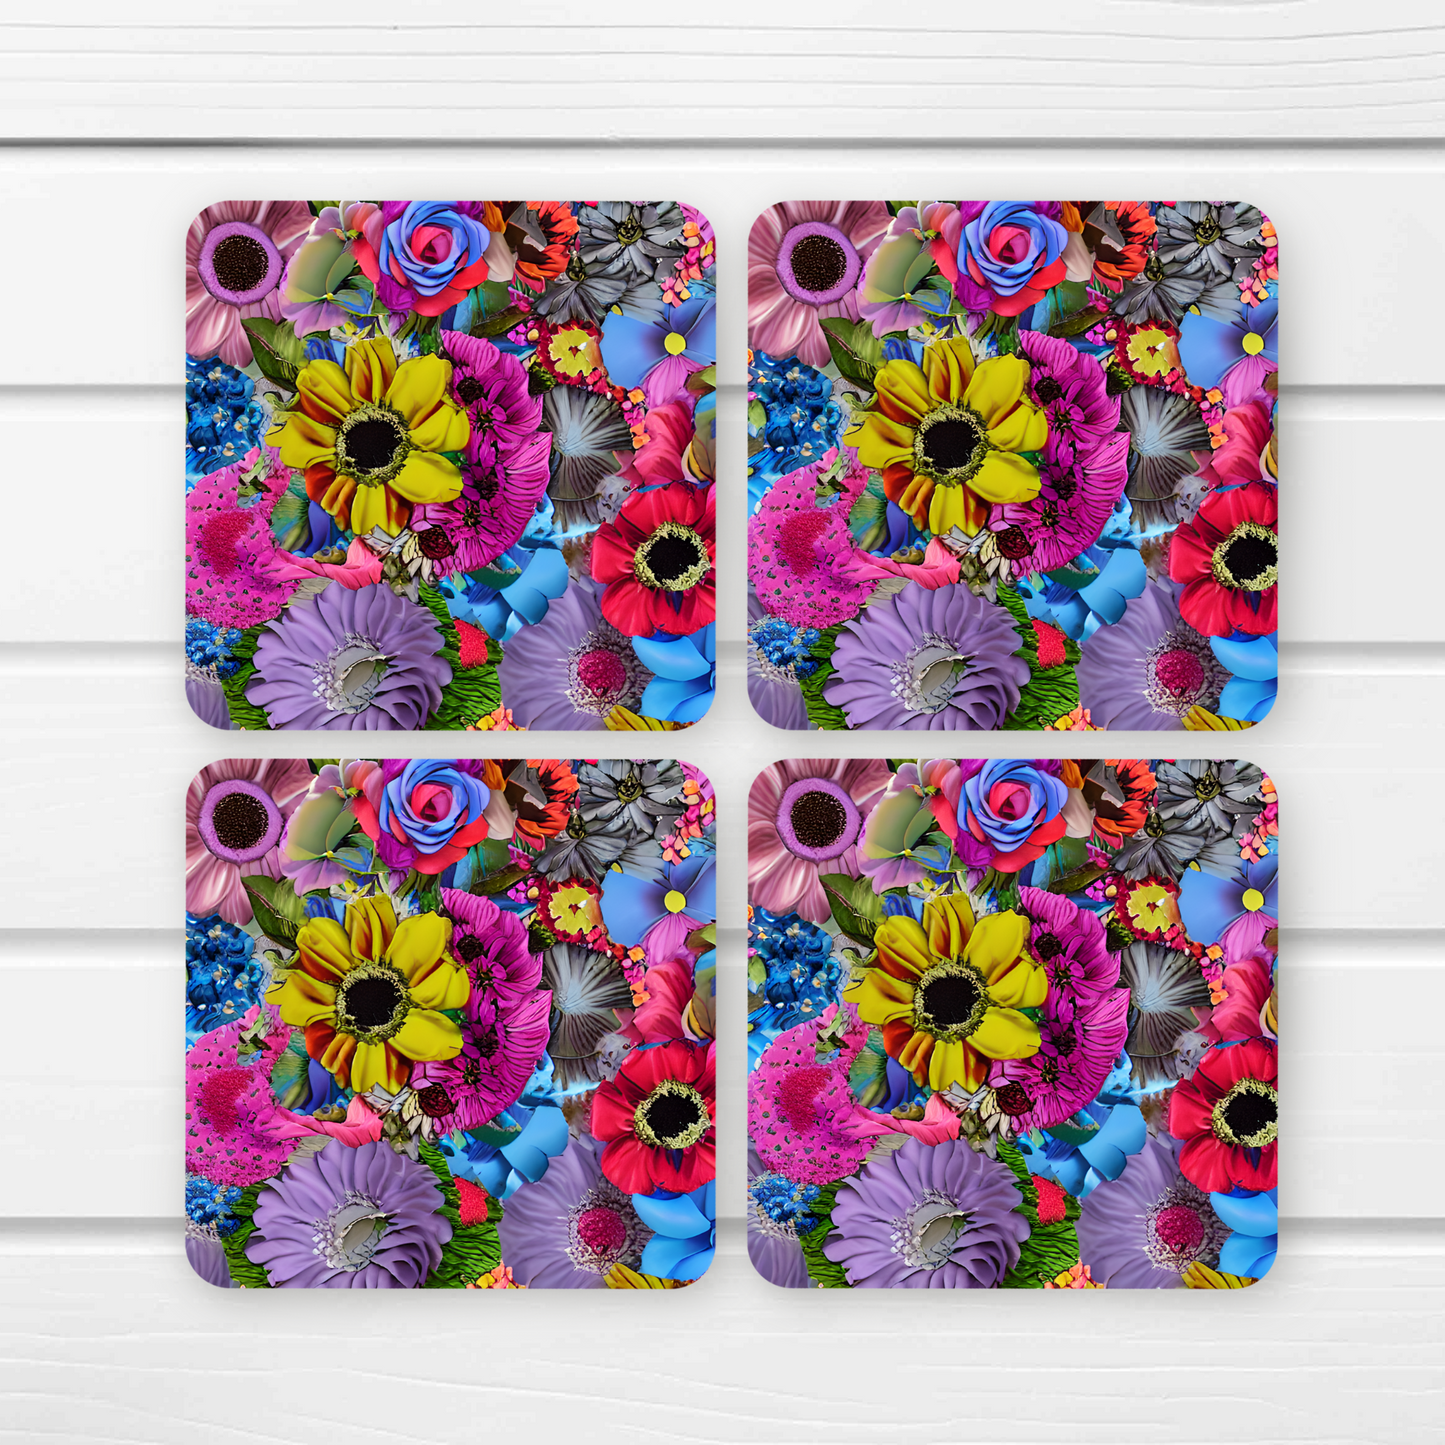 Beautifully Printed 3D Colourful Flowers Wooden Coasters for Stylish Home Décor